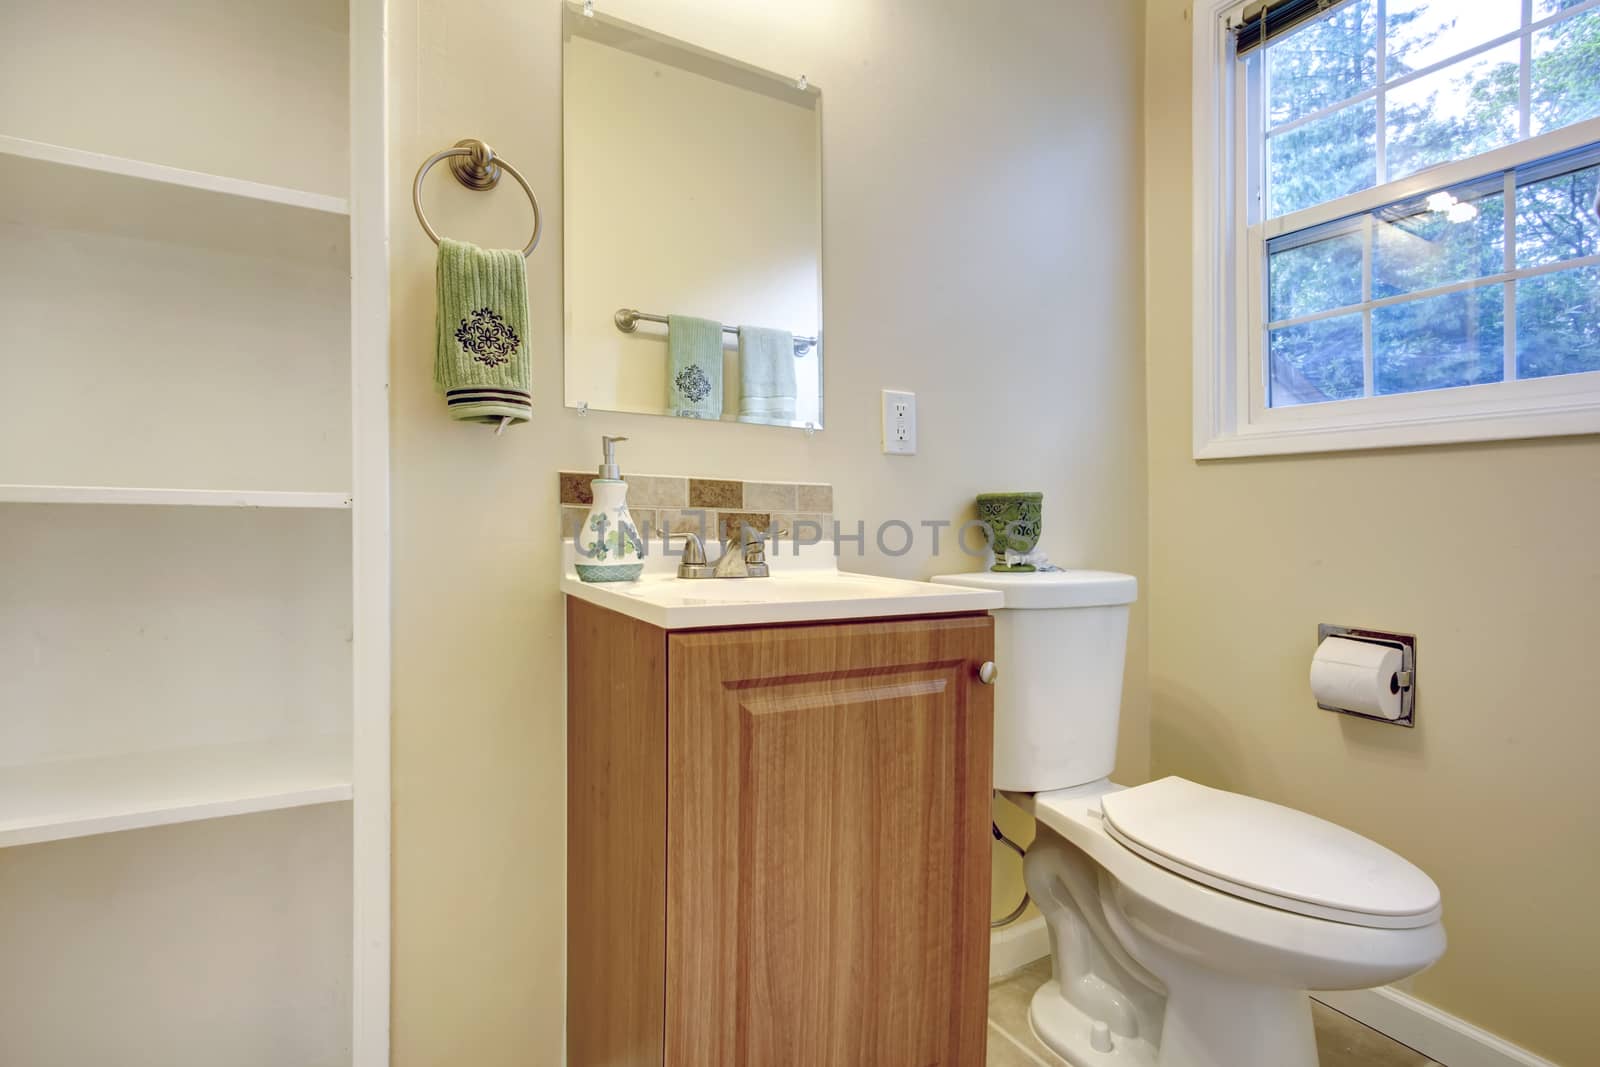 Light tones bathroom with french window. View of washbasin cabinet, toilet and built-in shelves